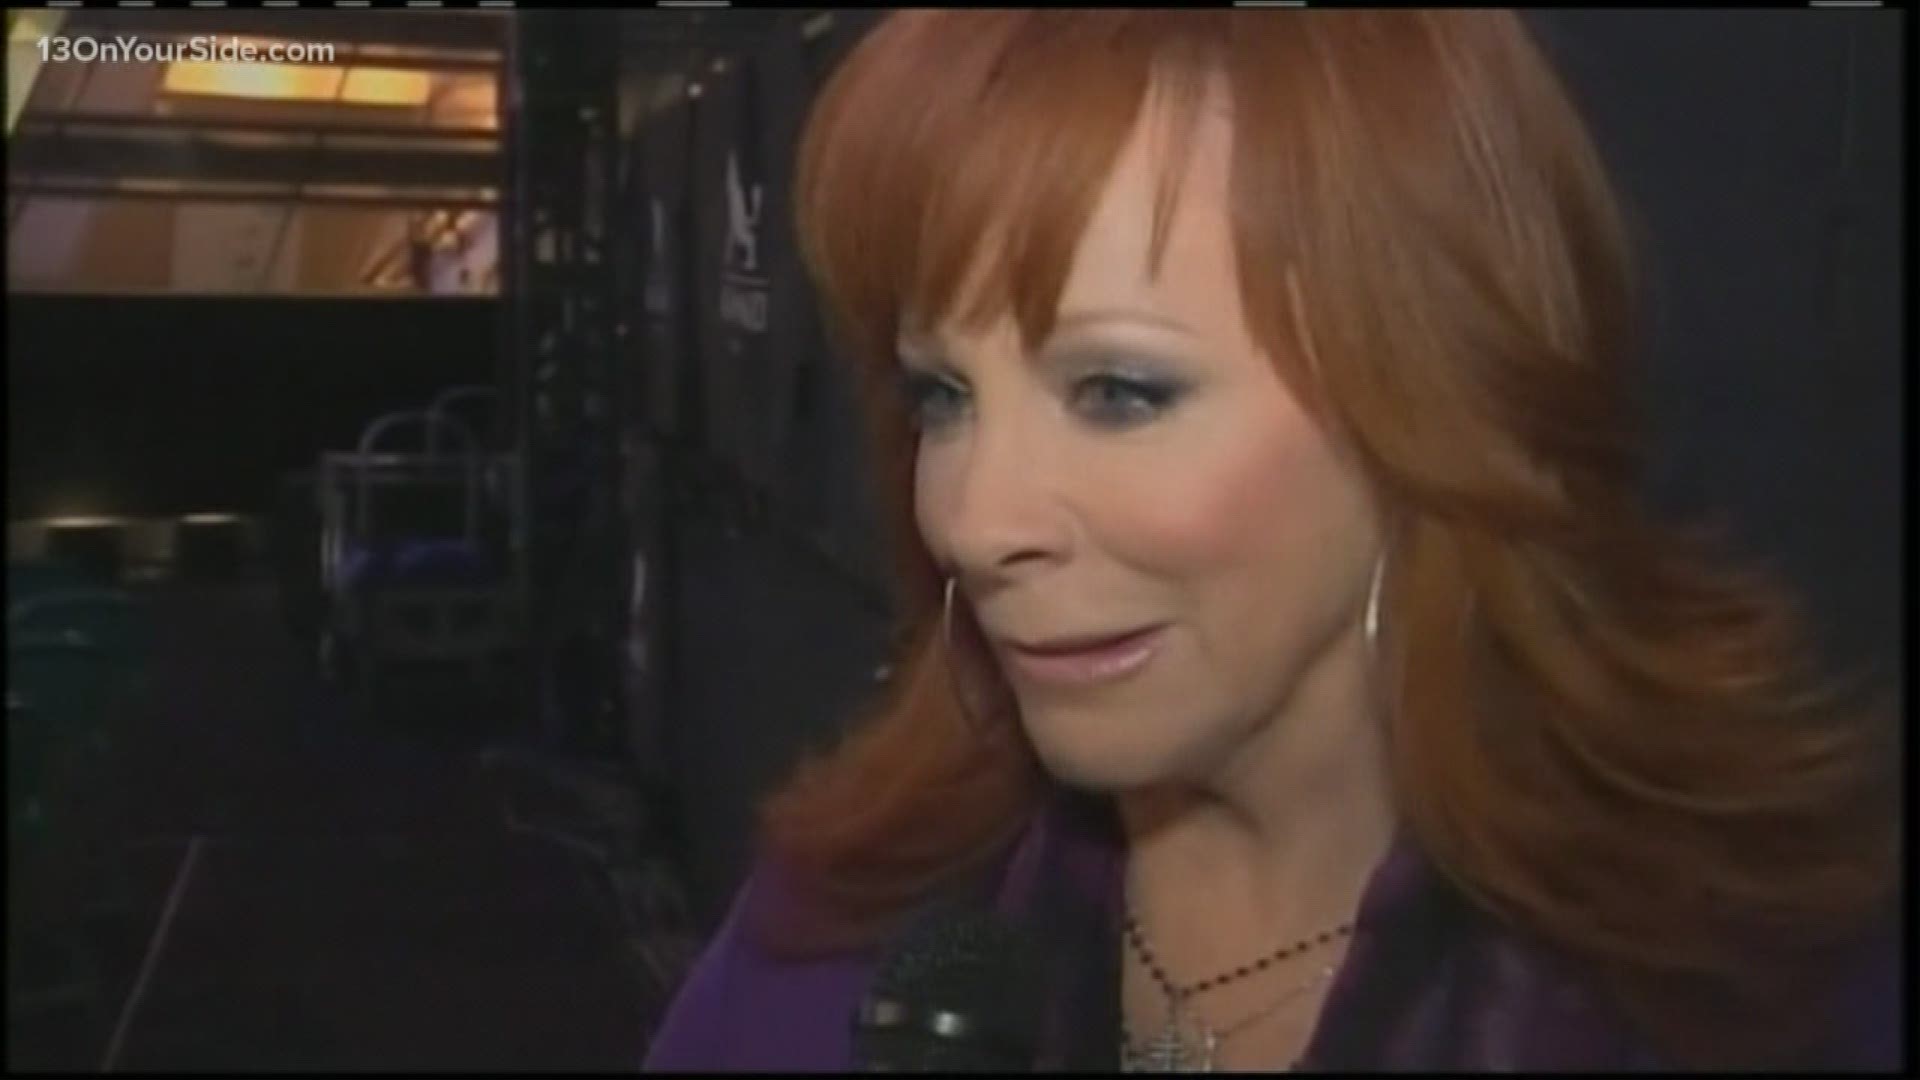 Country and western singer-songwriter, Reba McEntire, will be performing in Grand Rapids this coming spring.